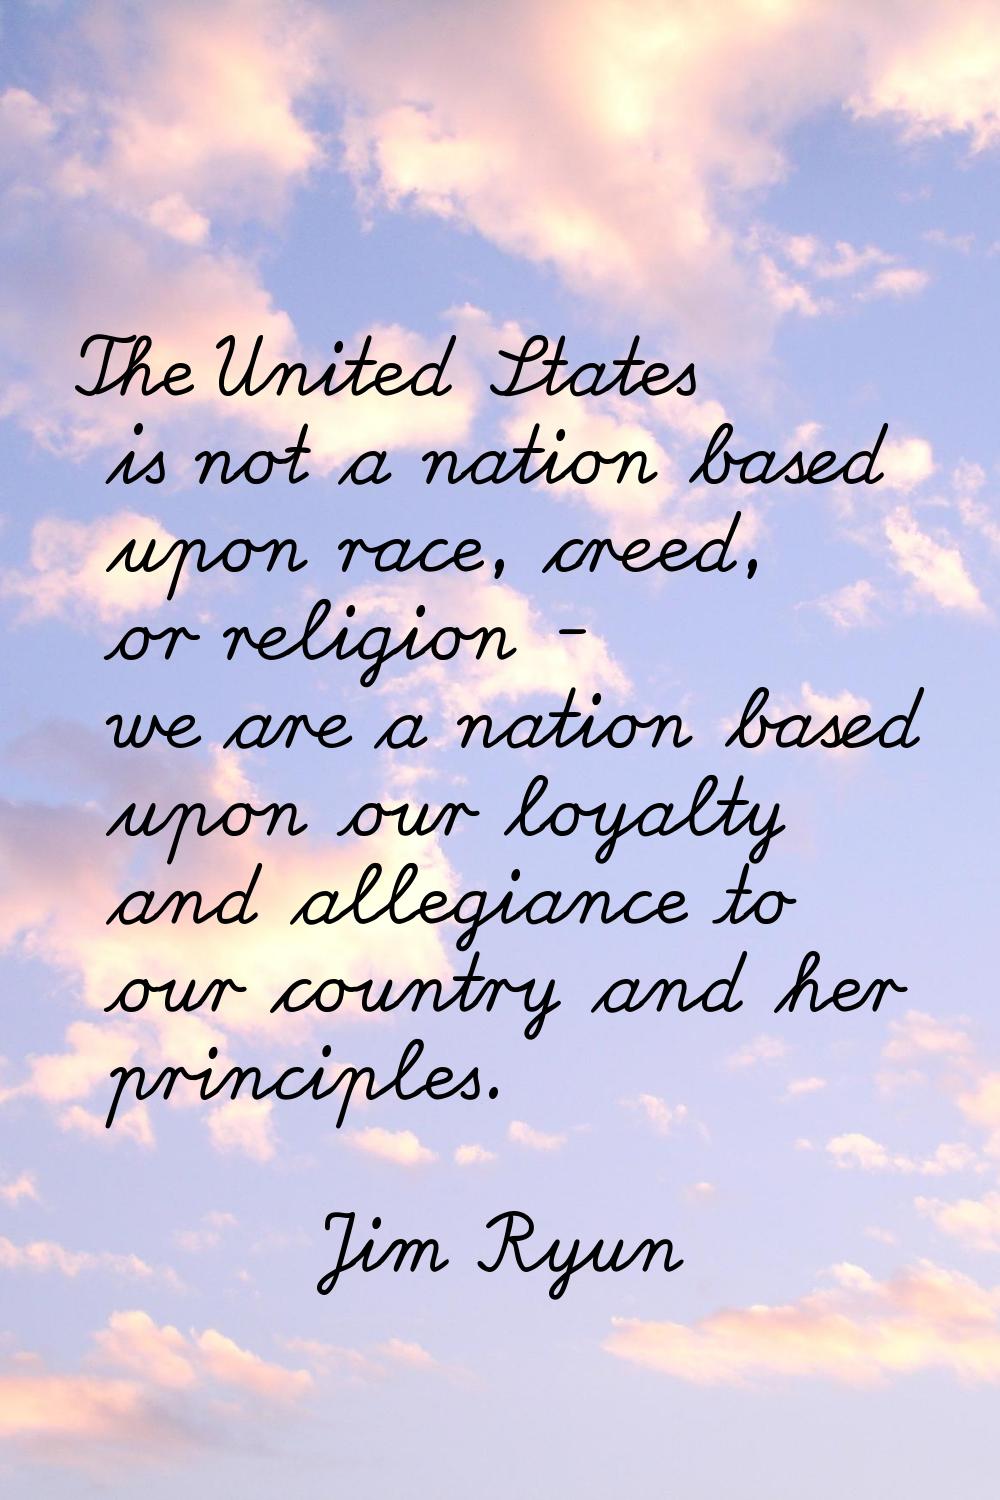 The United States is not a nation based upon race, creed, or religion - we are a nation based upon 